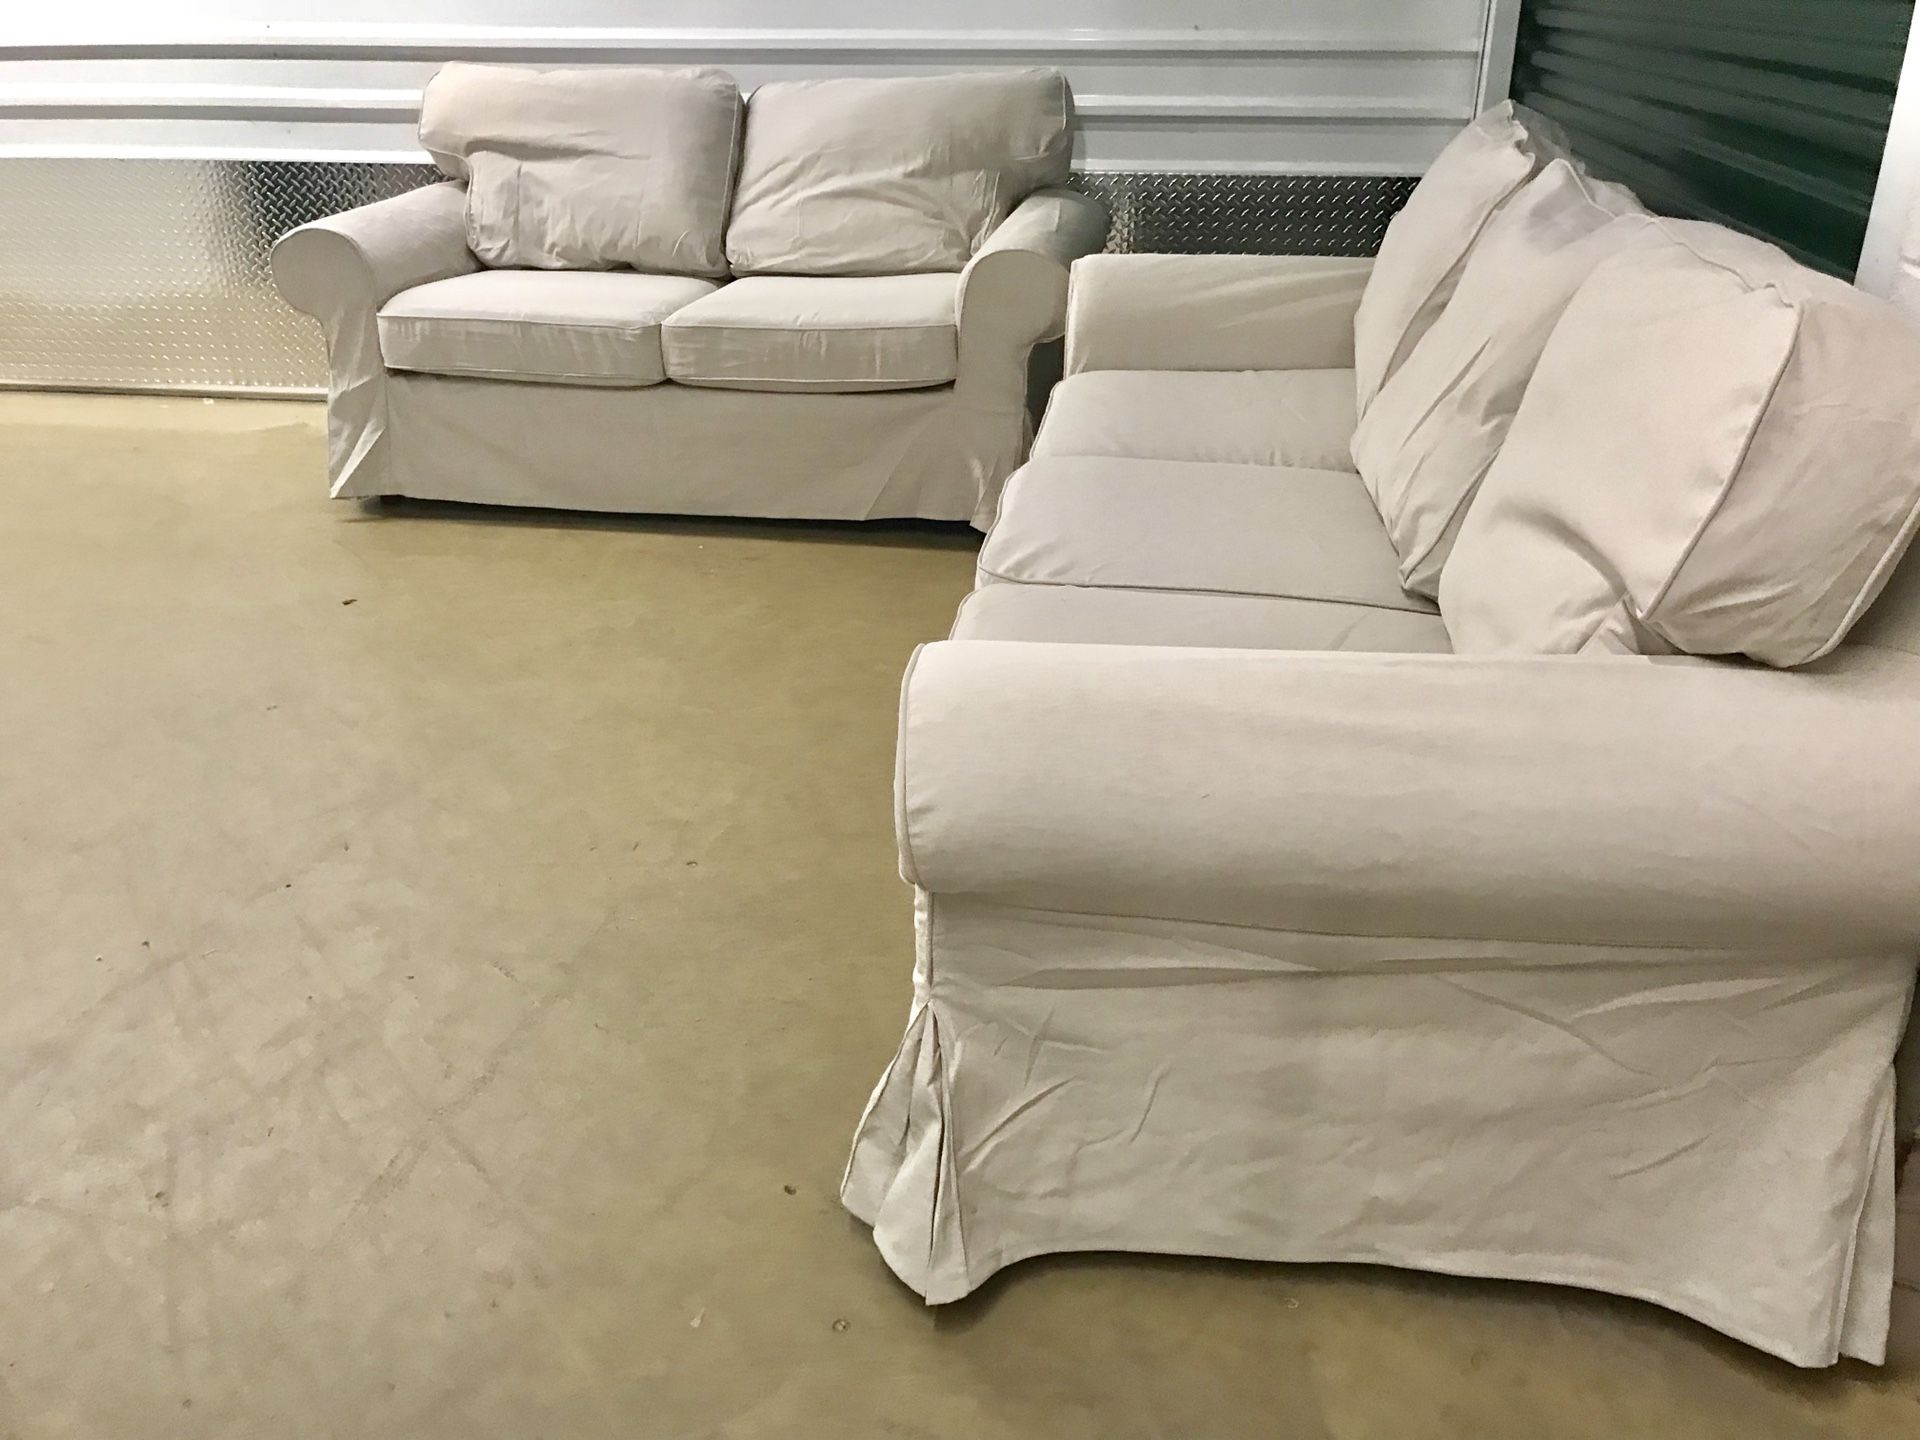 Ikea living room set loveseat and sofa with new covers! - Can Deliver